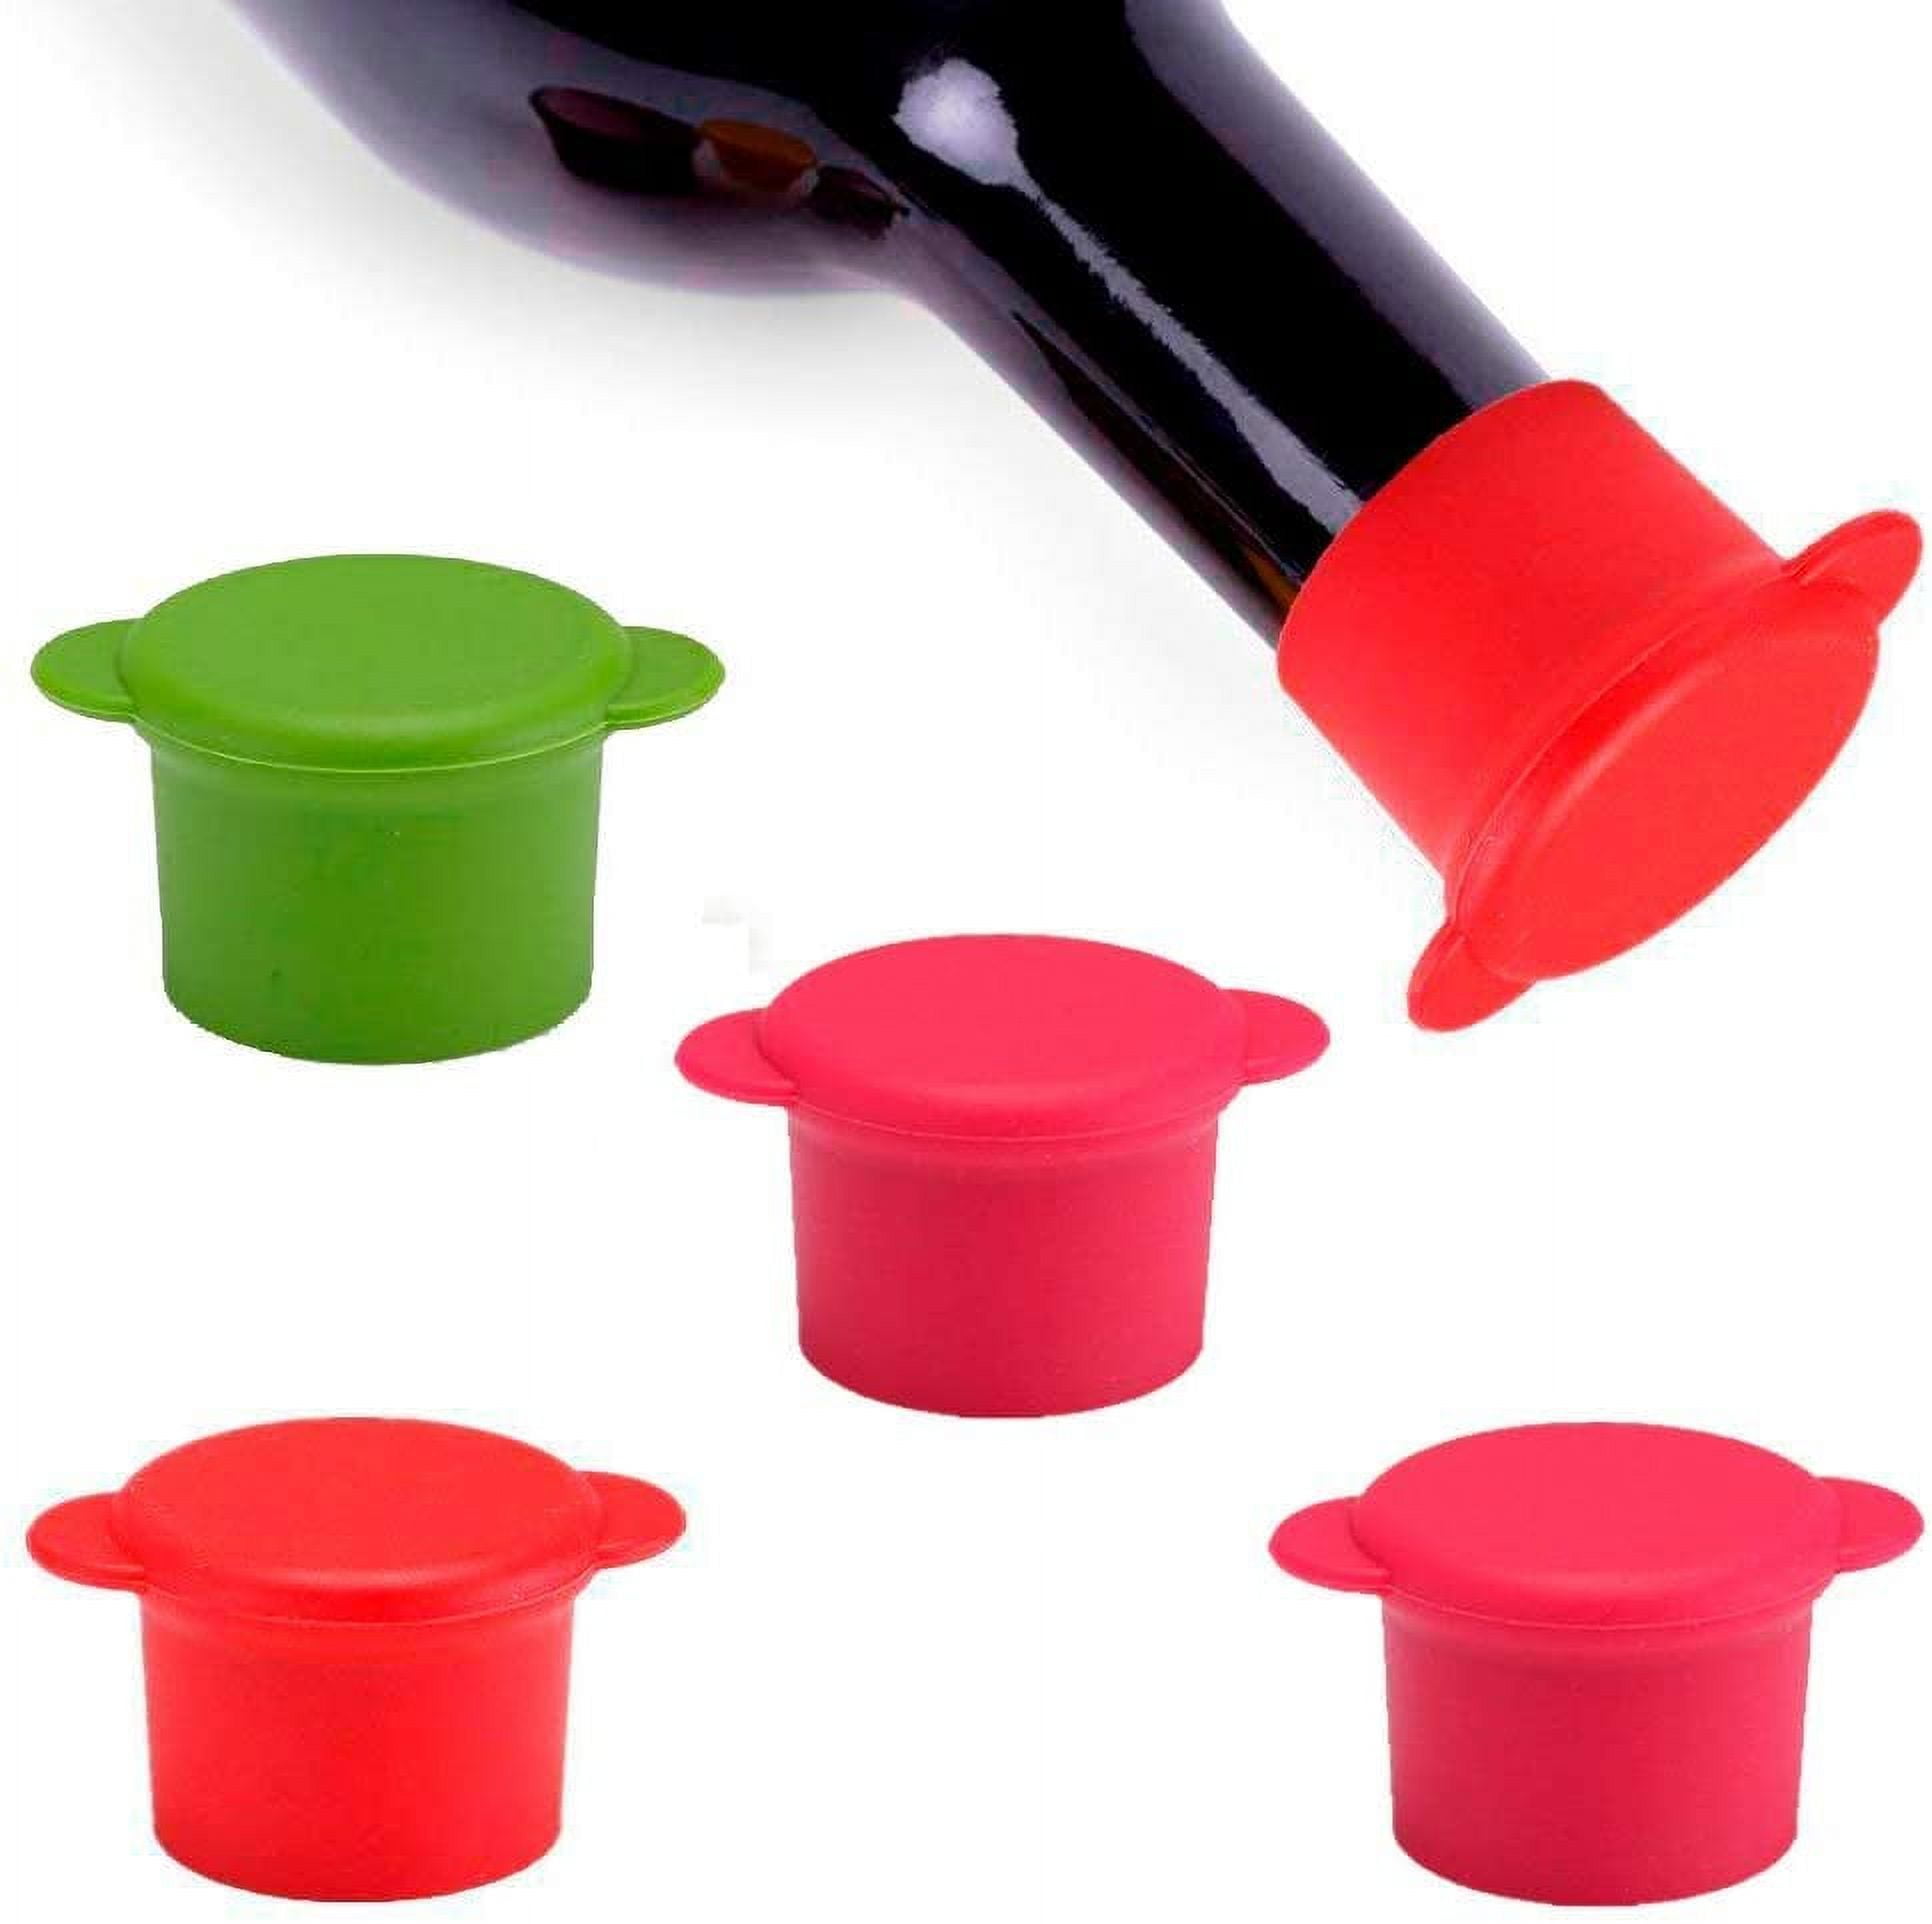 7Pcs Silicone Bottle Caps 26mm/1.02 ID Sealer Cover for Beer 7 Colors